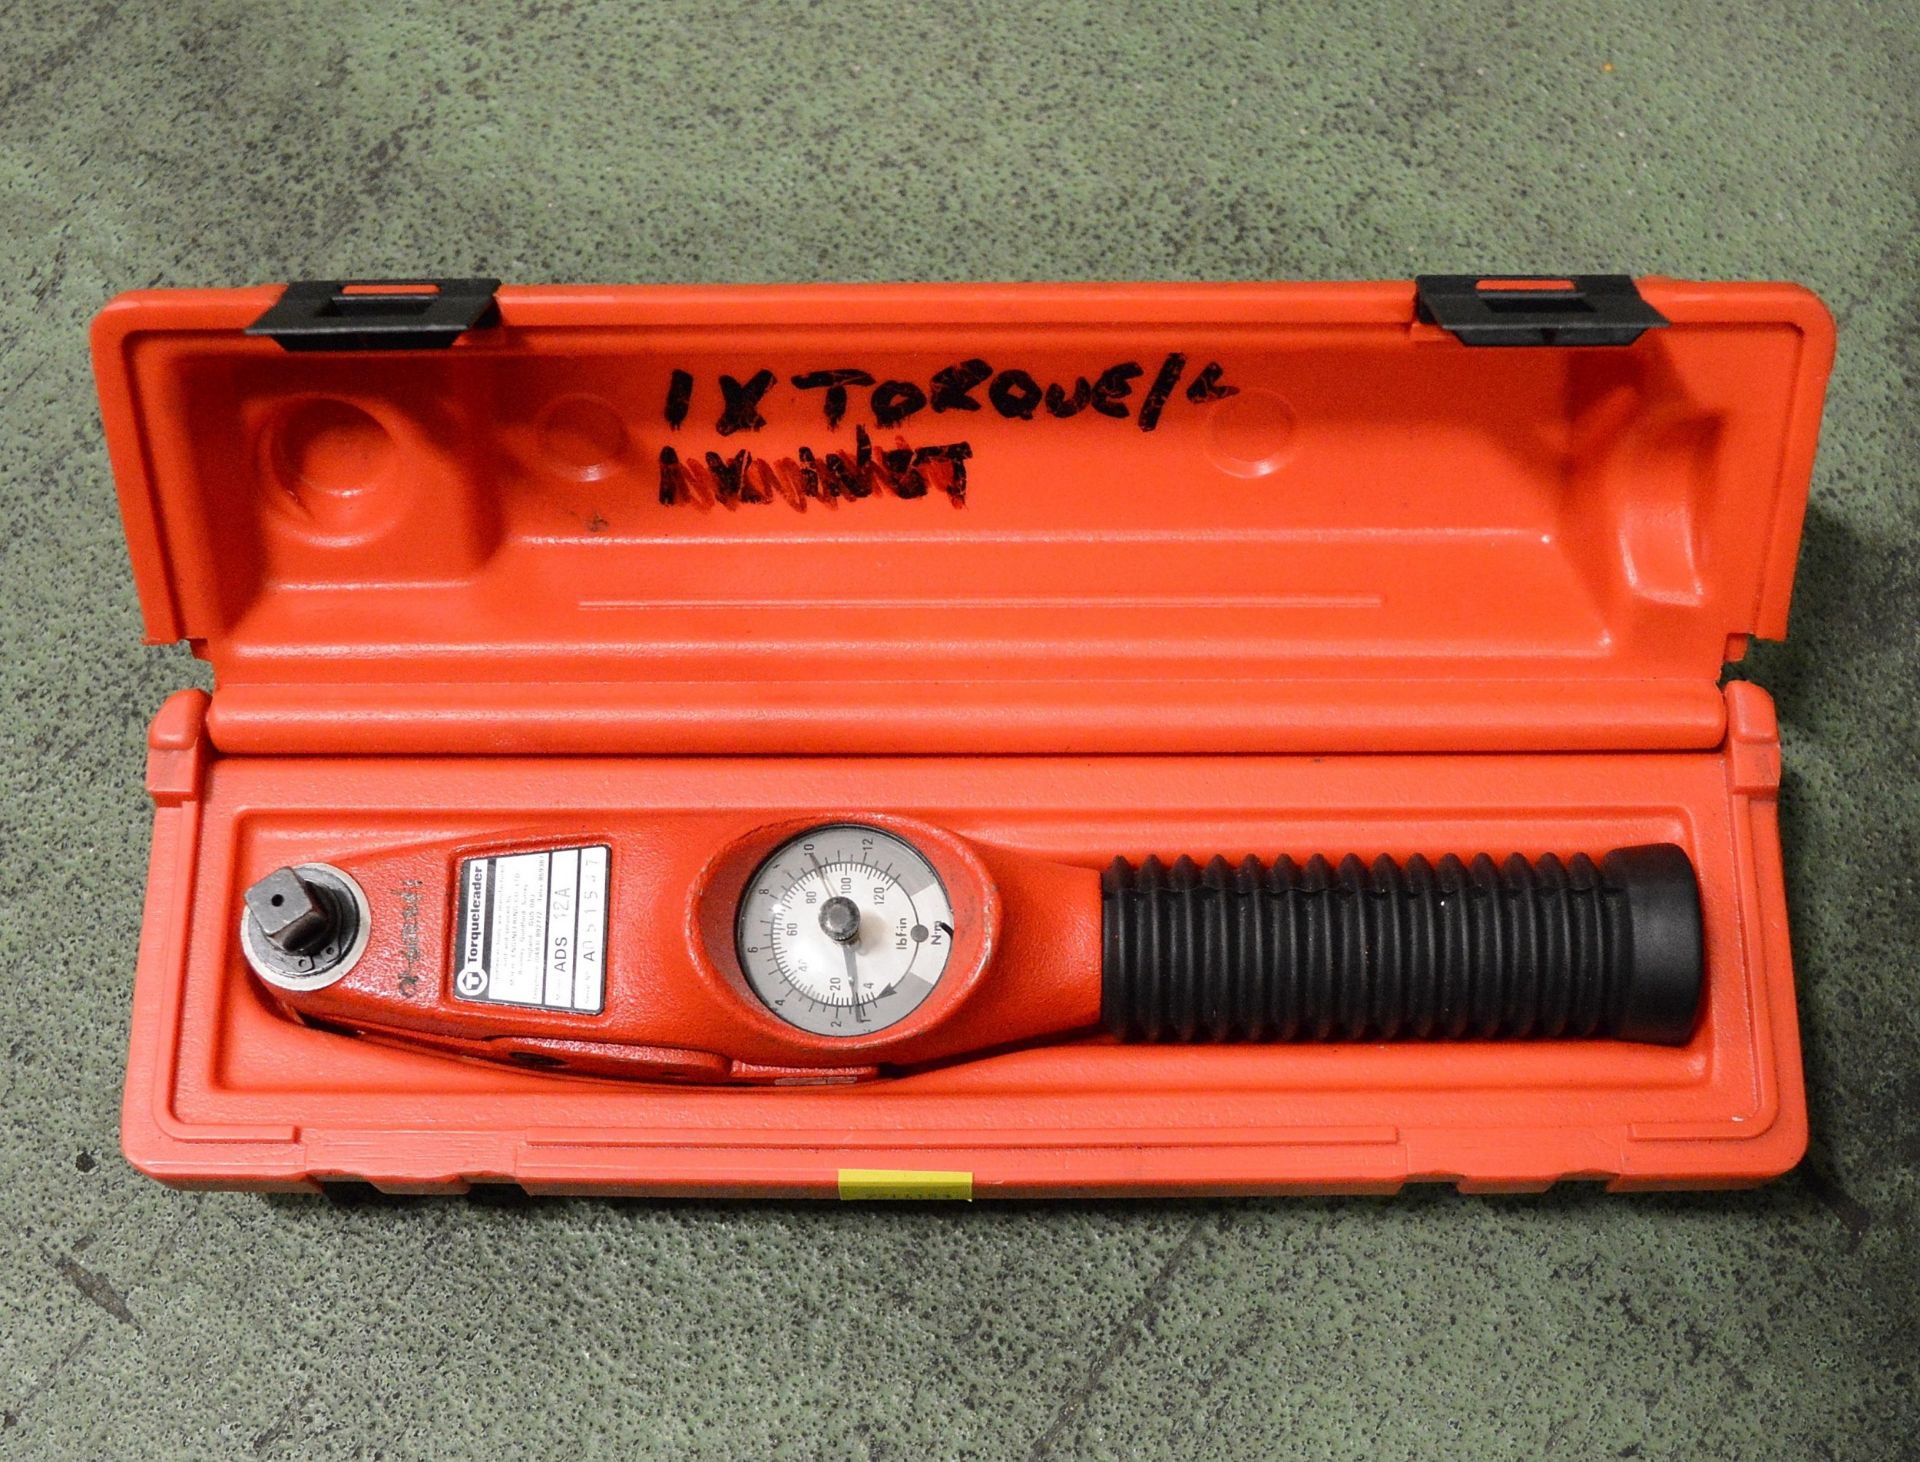 Torqueleader Dial Indicating Torque Wrench